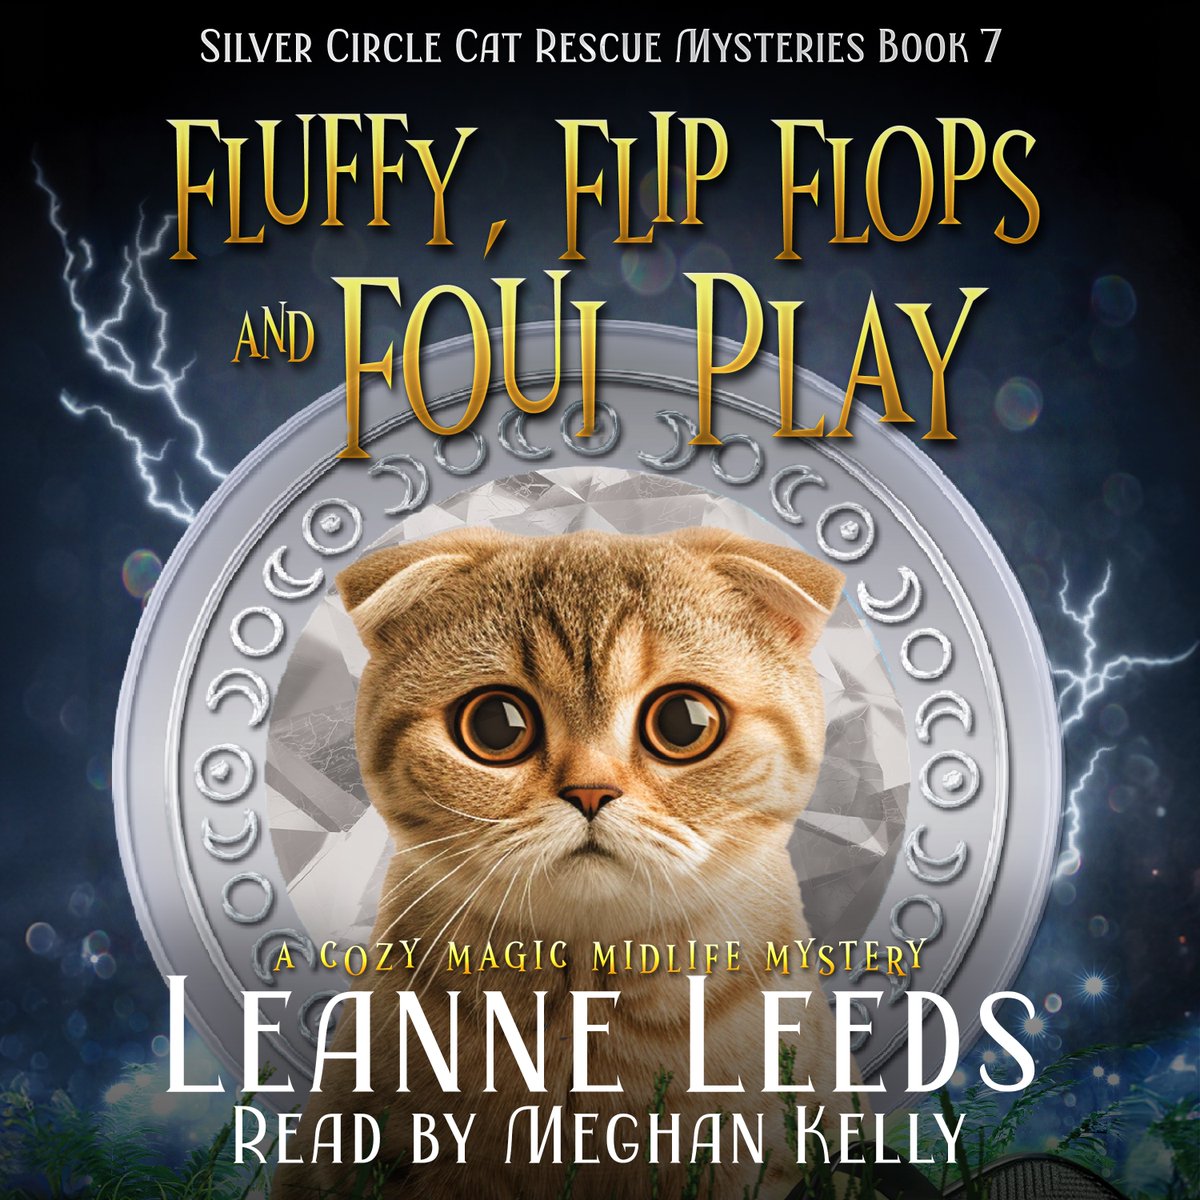 COMING VERY SOON- Fluffy, Flip Flops & Foul Play: Silver Circle Cat Rescue Mysteries Book 7 by the AMAZING Leanne Leeds!!  You will LOVE this one- Scottish Fold kitten!  COMING SOON!
#humanvoicesonly #cozymysteryaudio #cozymysteryaudiobook

bit.ly/3K0W7HK